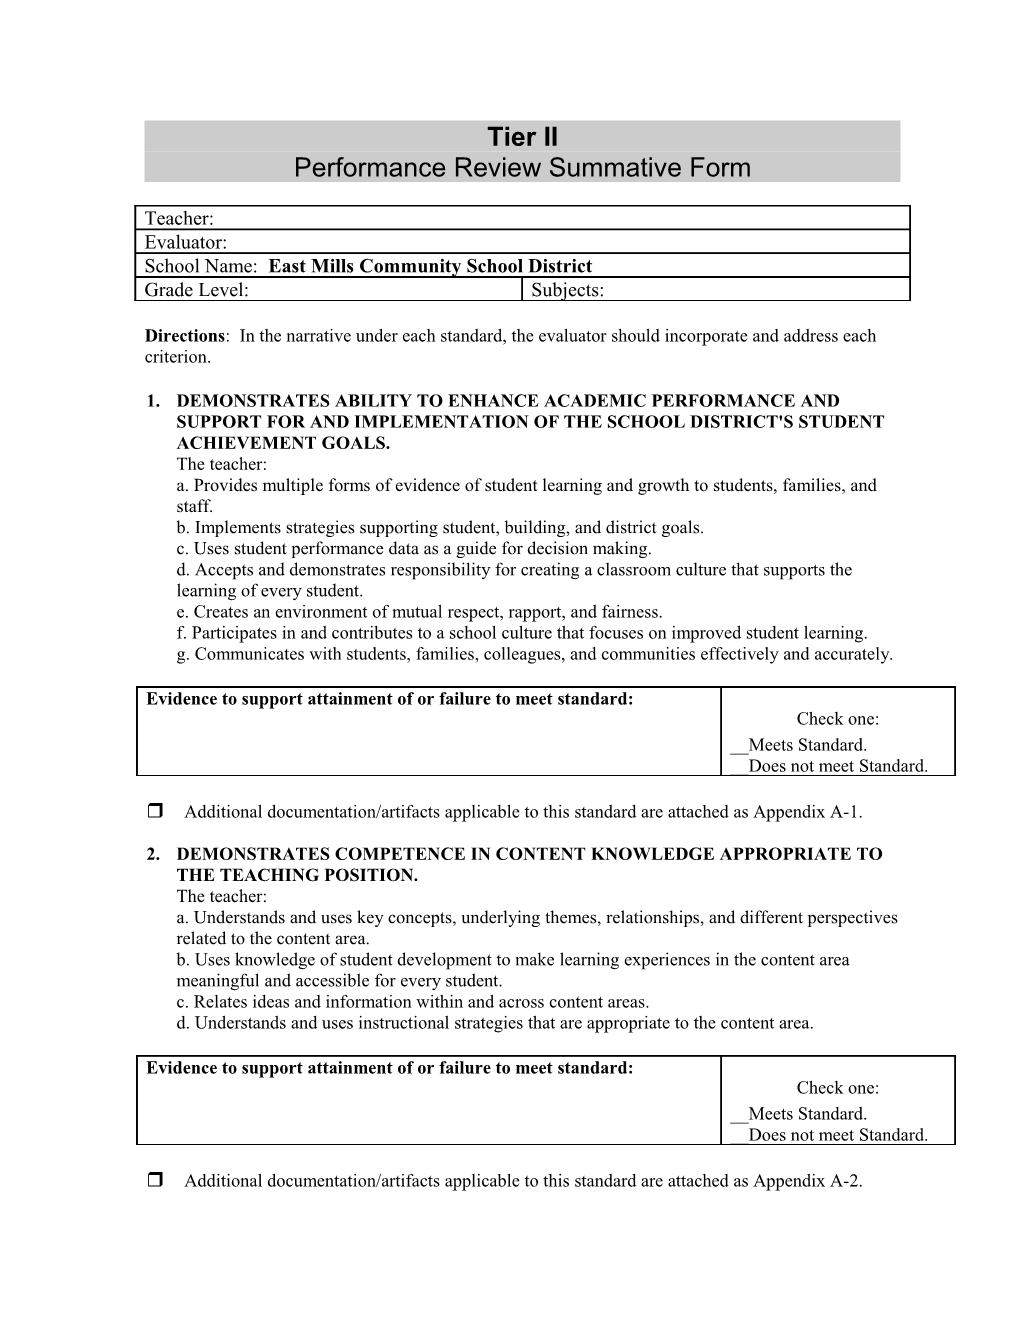 Performance Review Summative Form